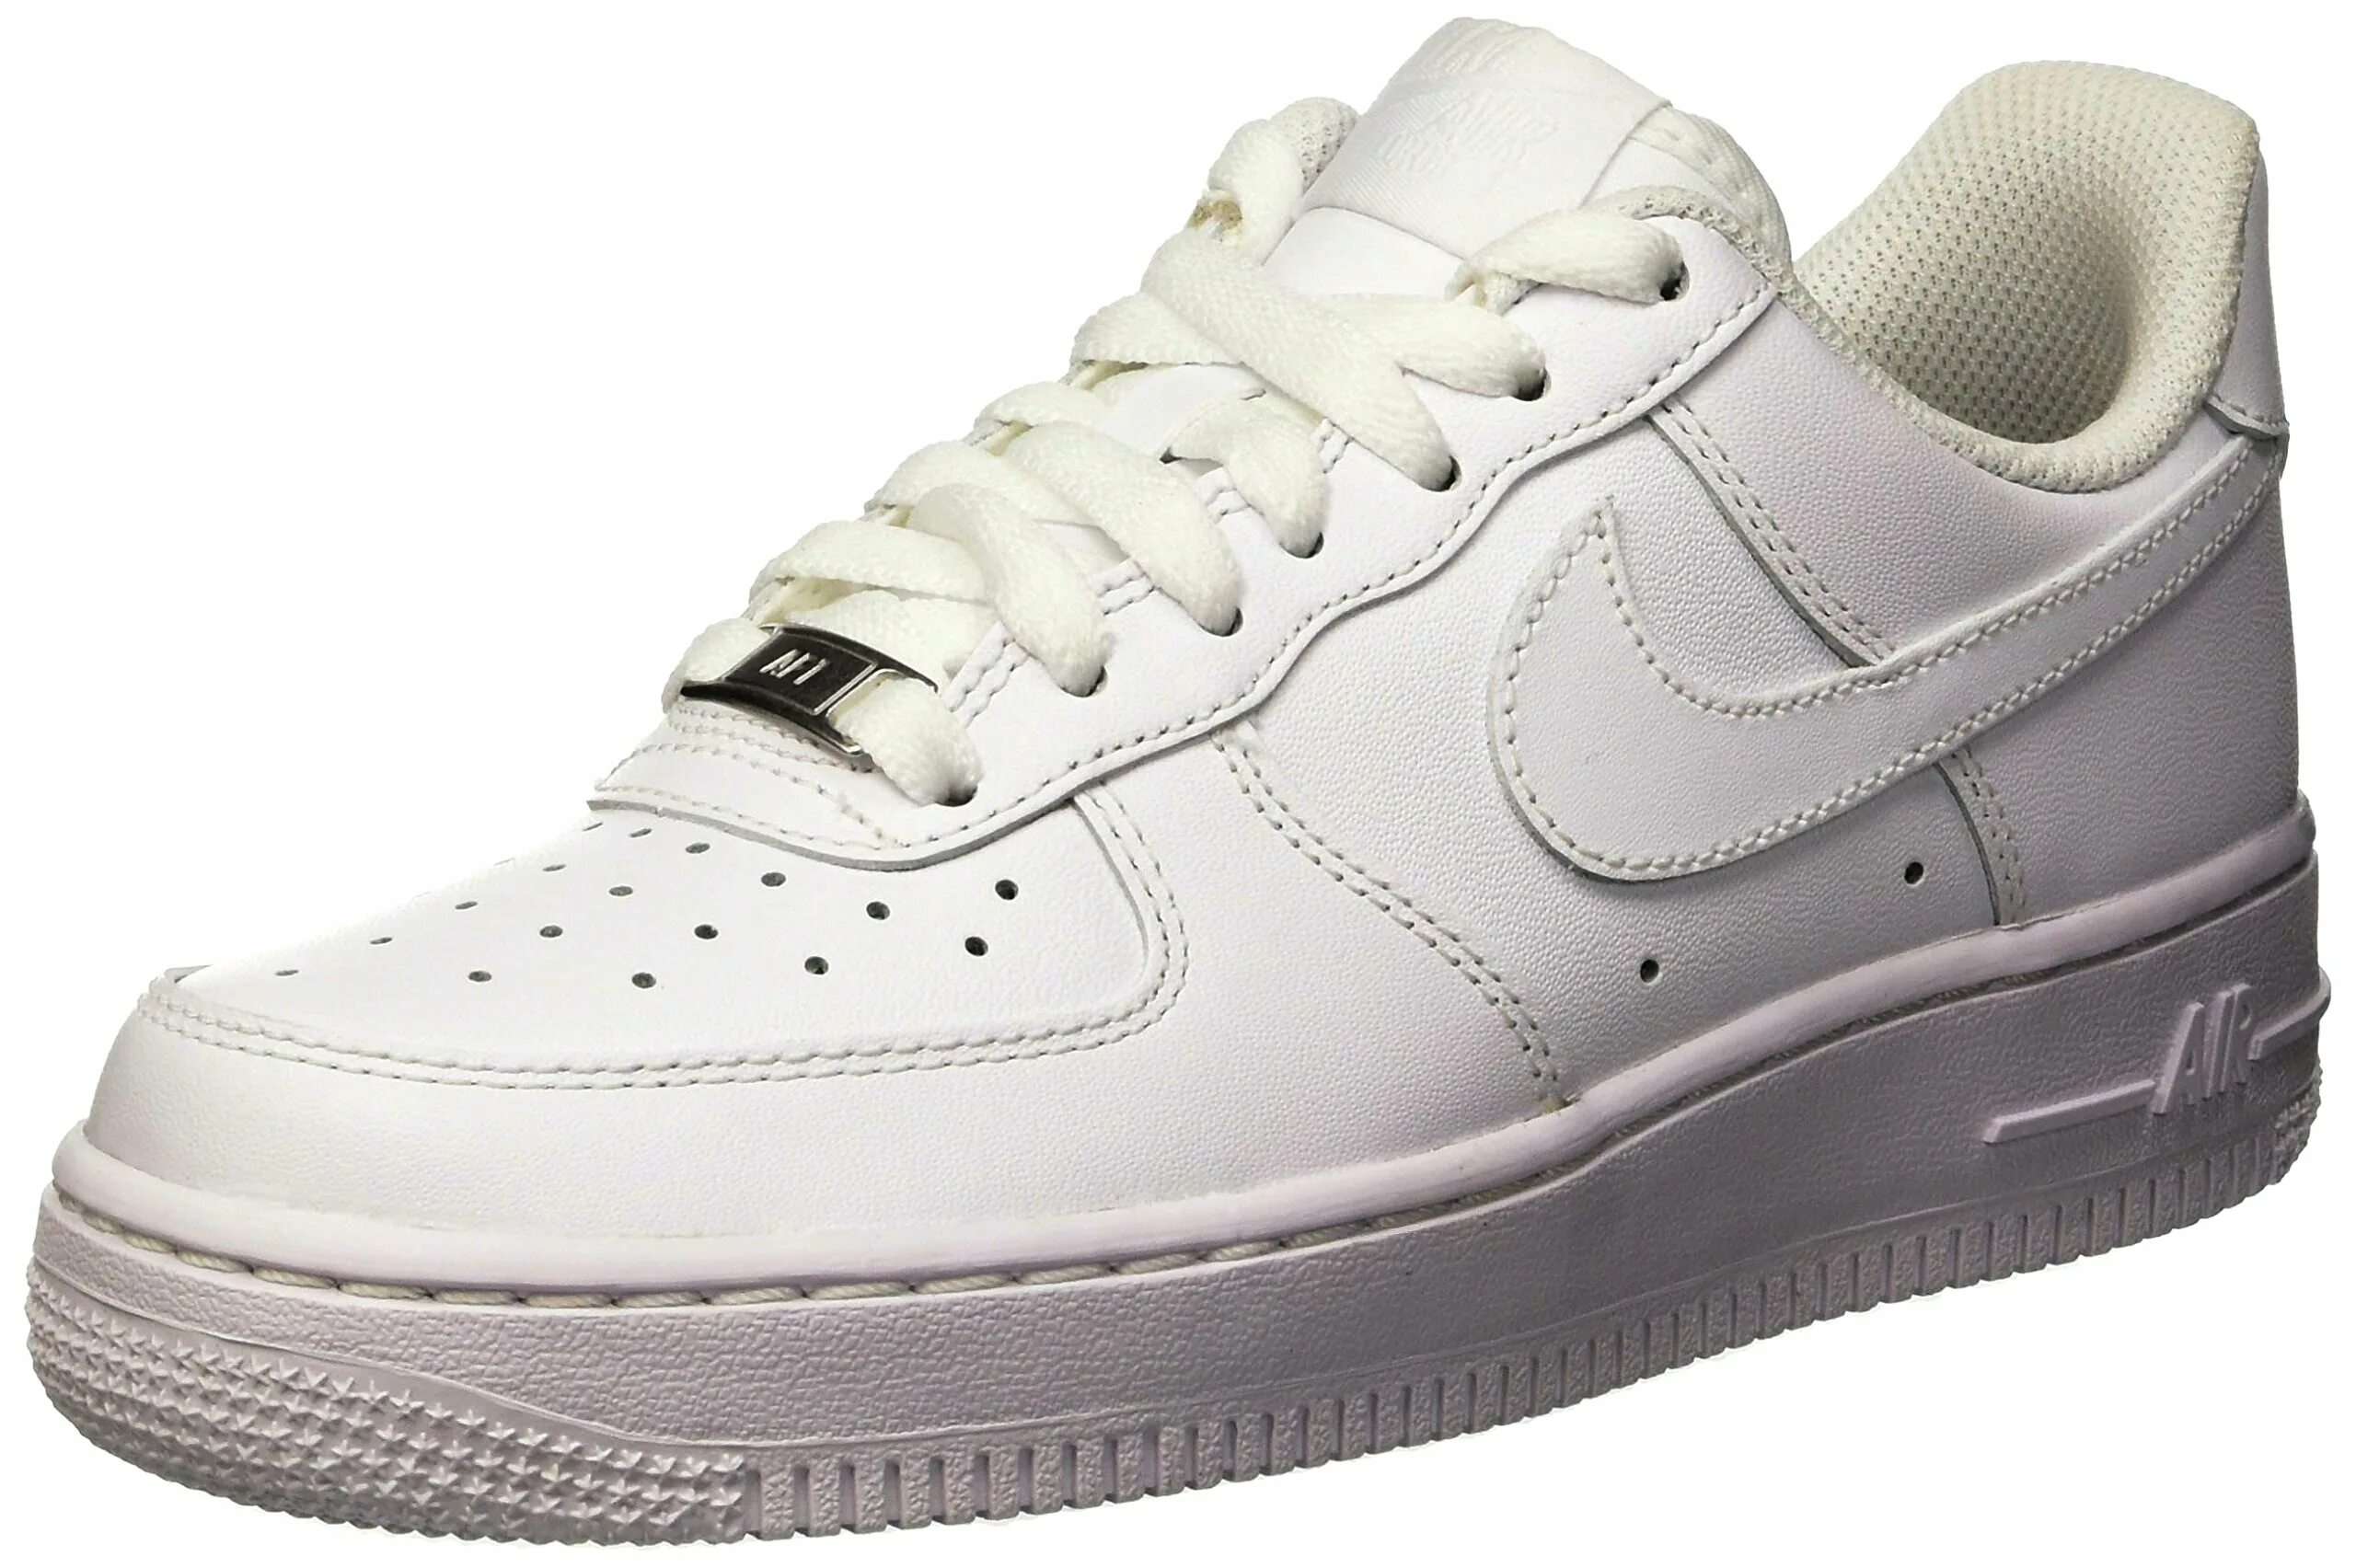 Force first force. Nike Air Force 1 07. Сникеры Nike Air Force 1. Nike Air Force 1 315115 112. Nike Air Force 1 07 2.